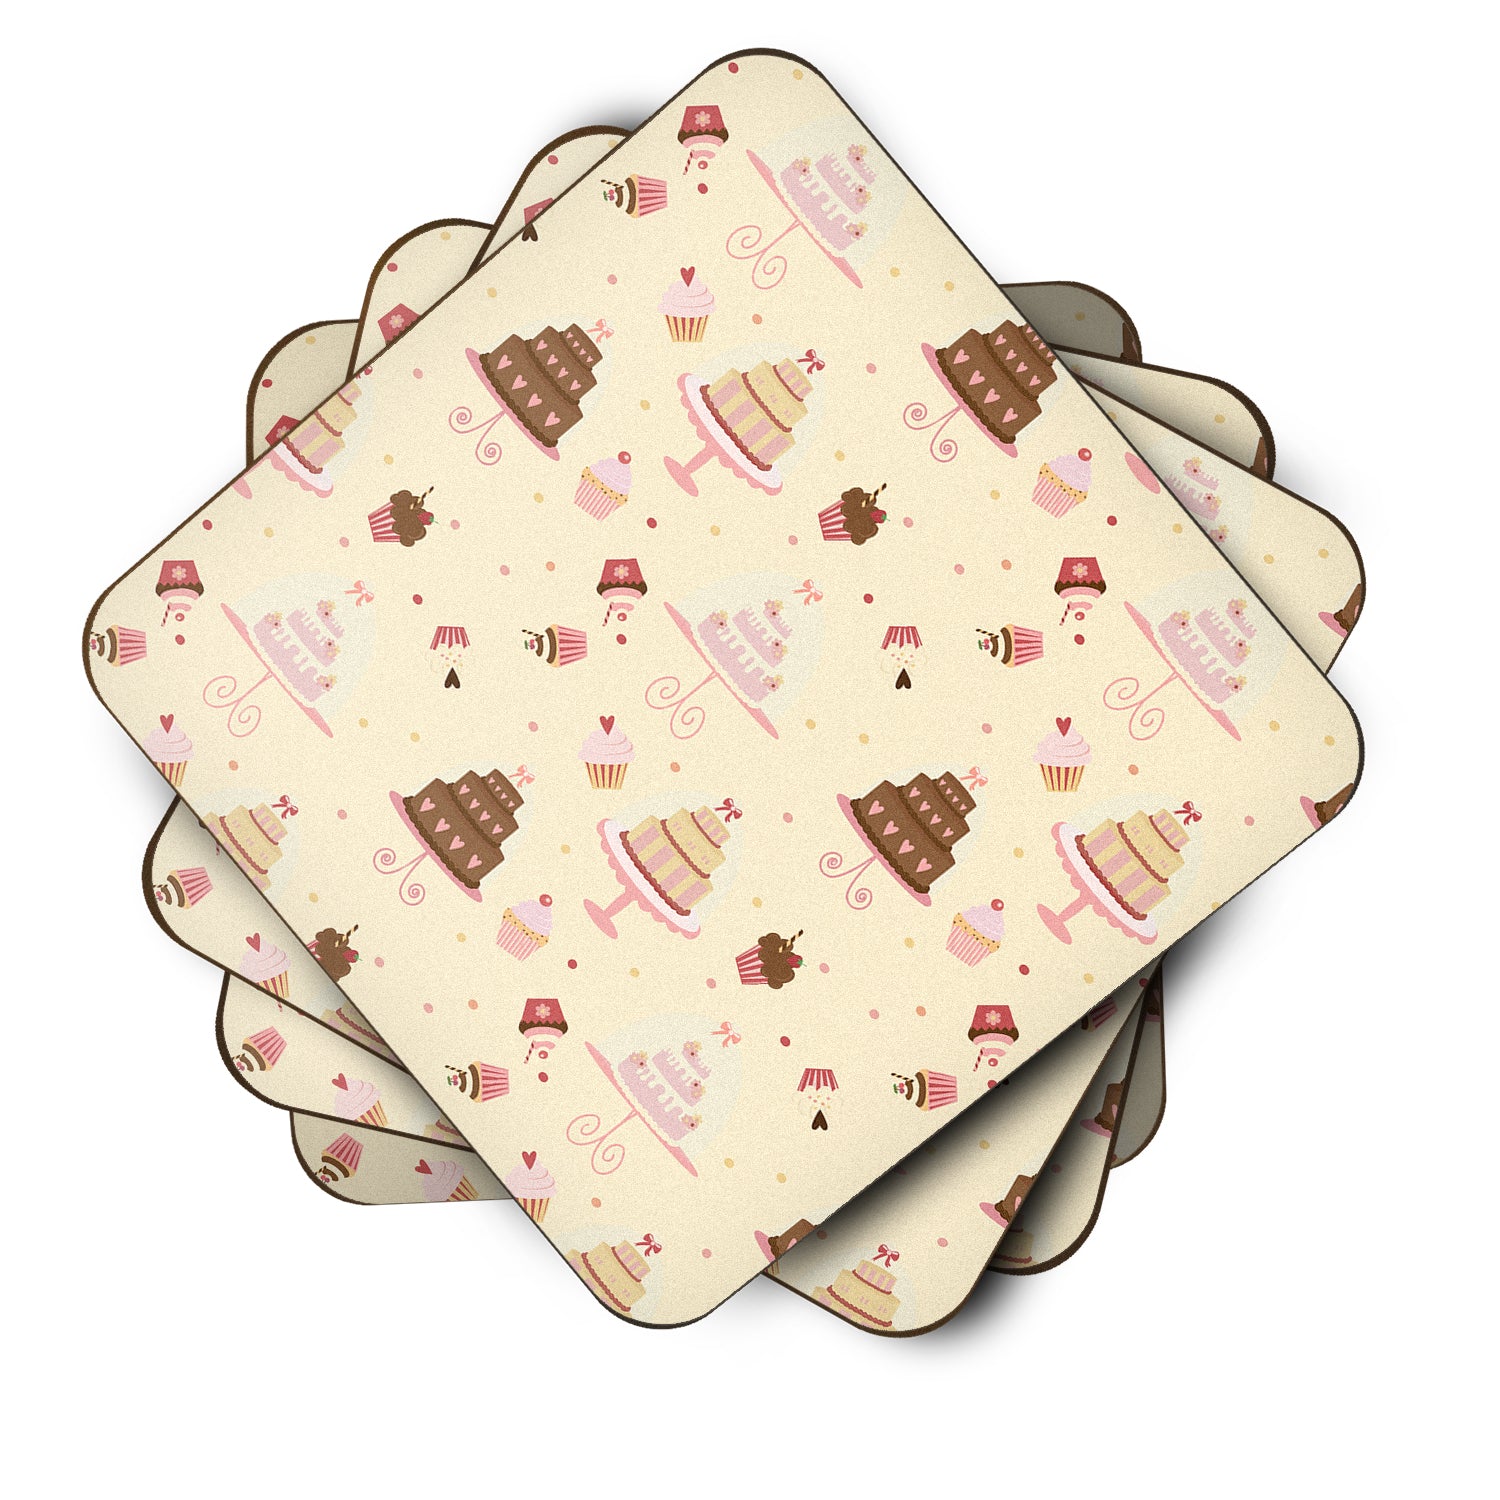 Cakes and Cupcakes Foam Coaster Set of 4 BB7310FC - the-store.com